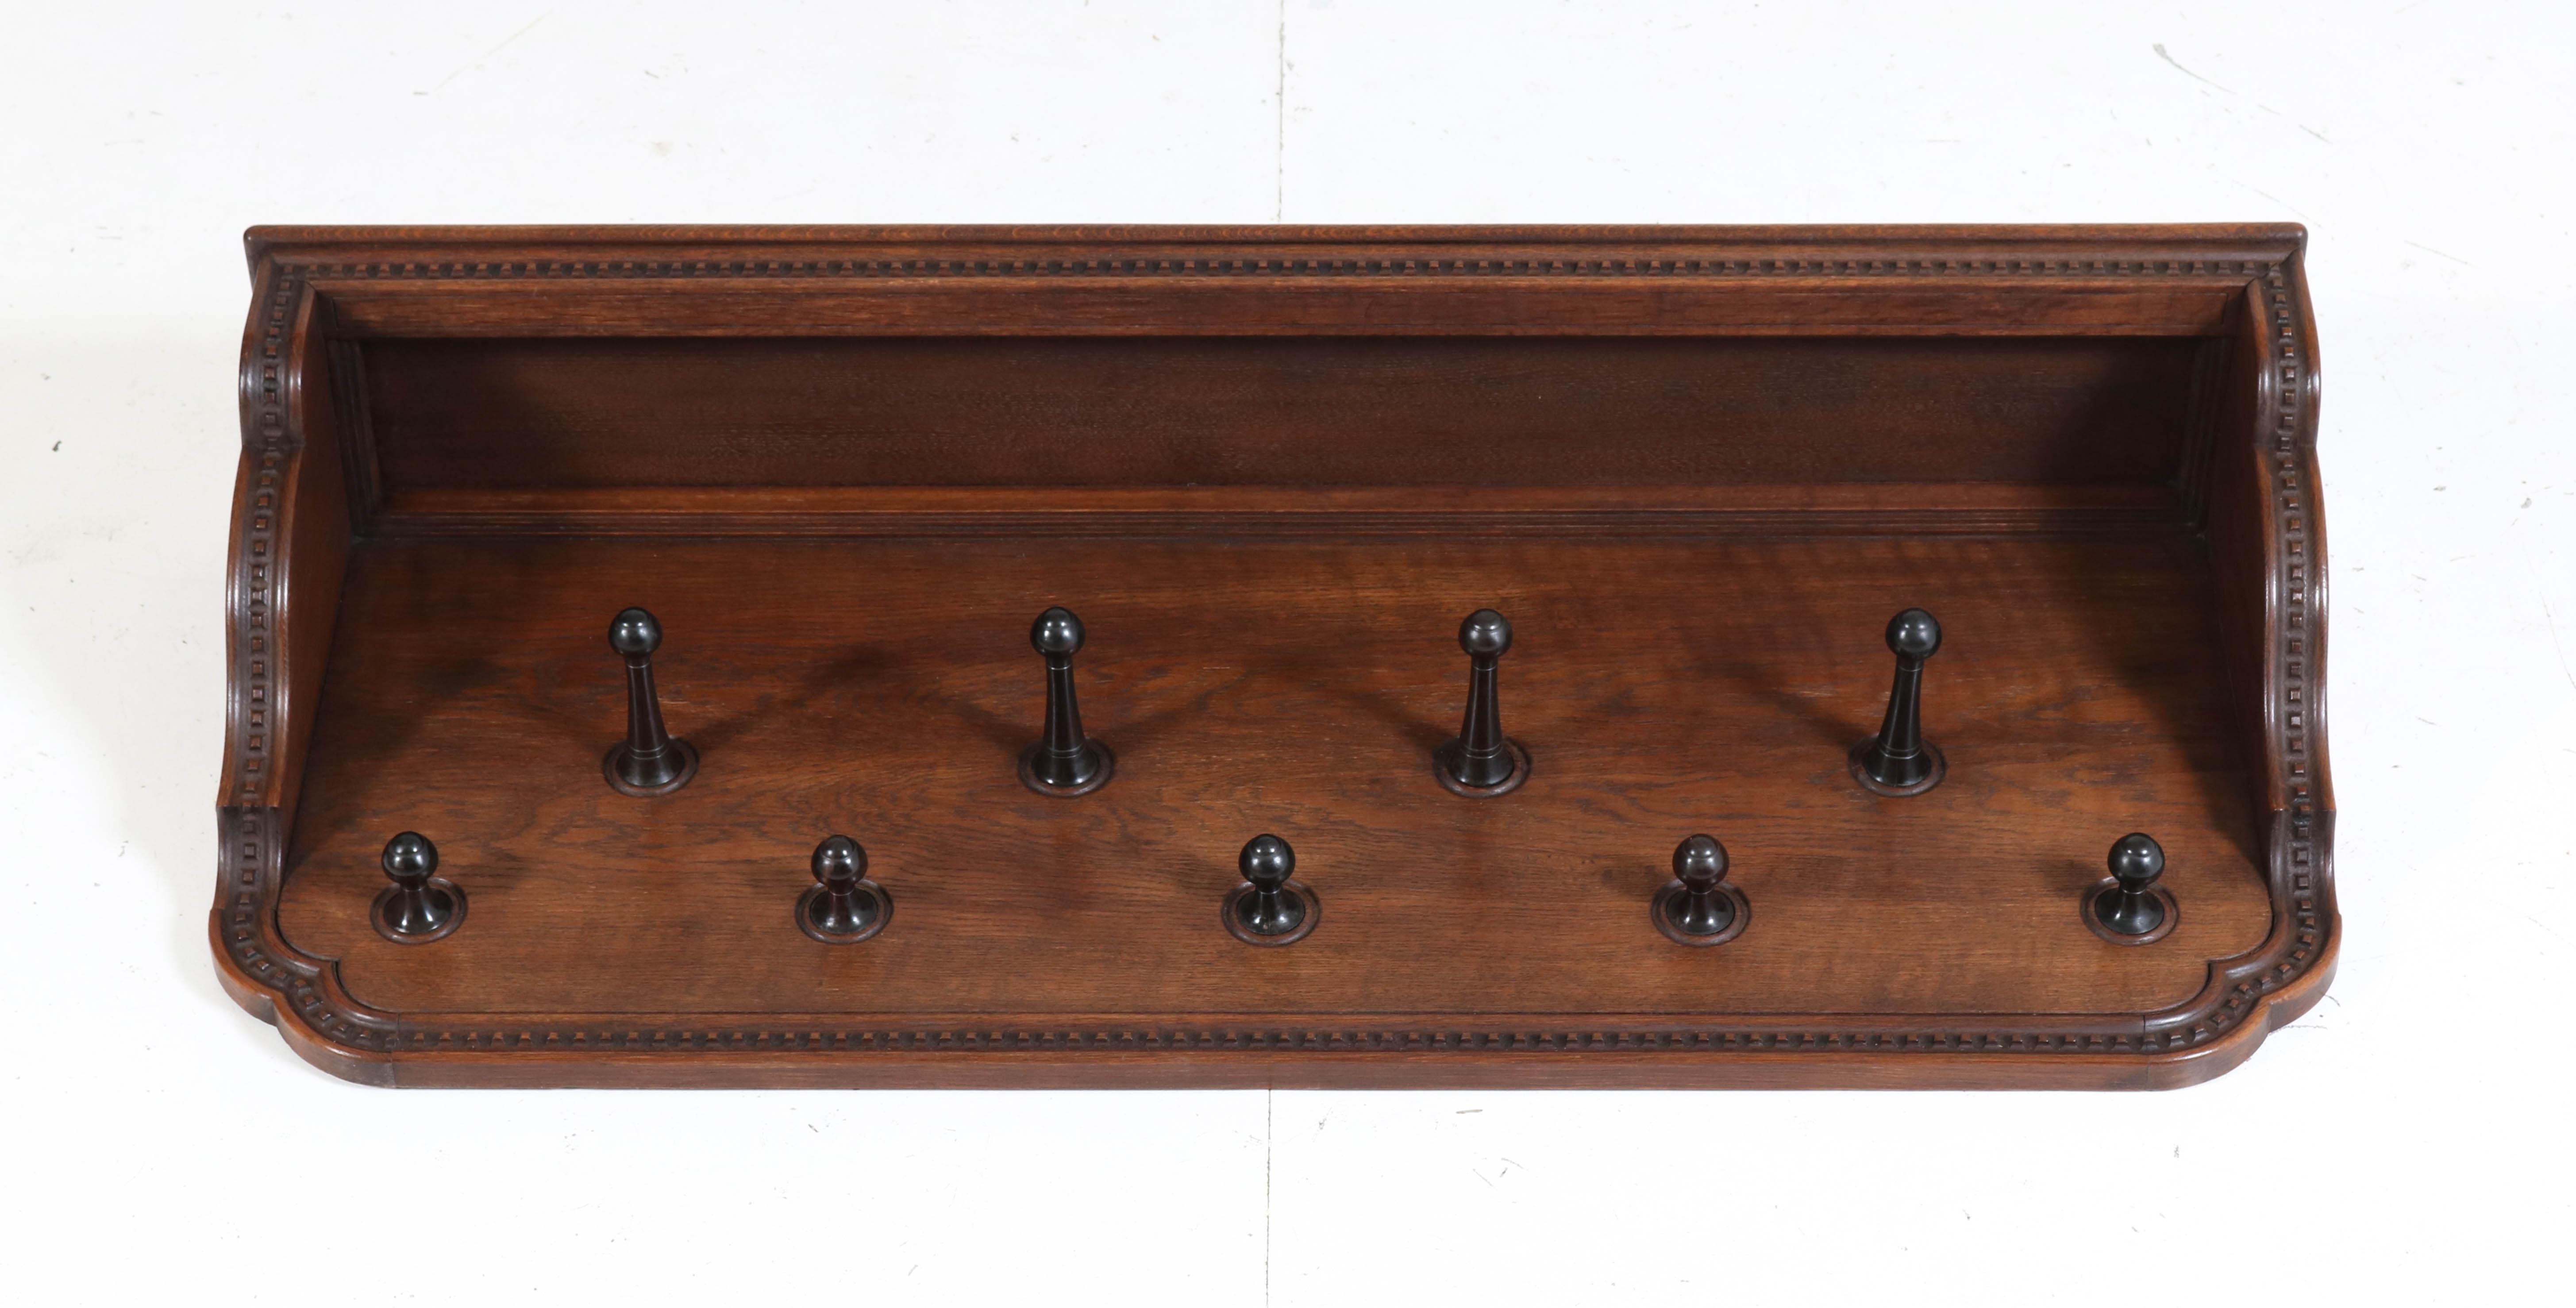 Magnificent and rare Art Nouveau Arts & Crafts coat rack.
Design by K.P.C. de Bazel.
Striking Dutch design from the 1900s.
Solid oak and oak veneer with original solid ebony hooks.
In good original condition with minor wear consistent with age